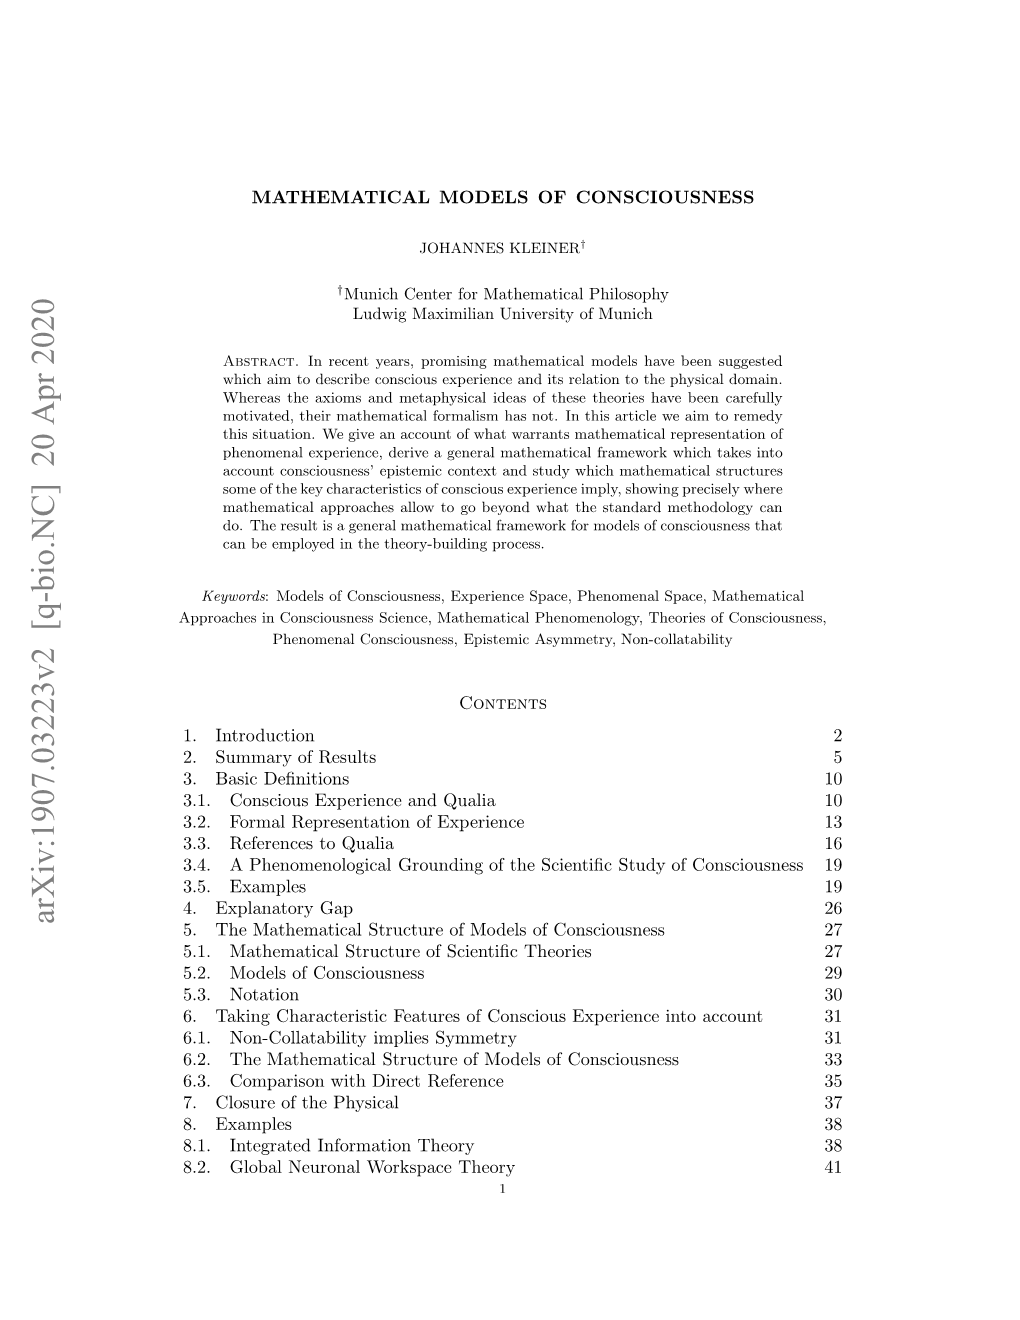 Mathematical Models of Consciousness